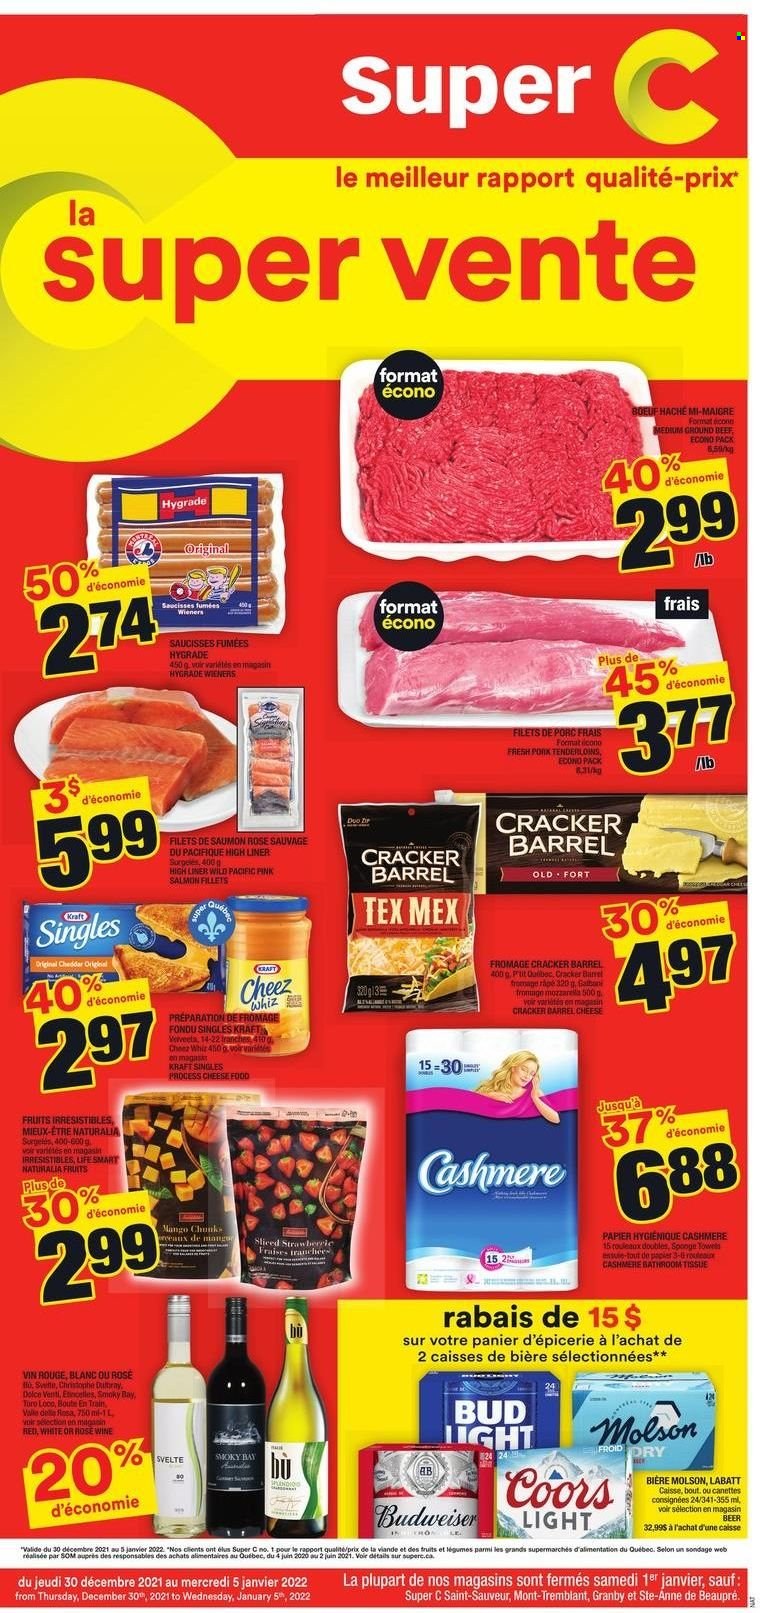 thumbnail - Super C Flyer - December 30, 2021 - January 05, 2022 - Sales products - salmon, salmon fillet, Kraft®, sandwich slices, cheddar, cheese, Kraft Singles, crackers, wine, rosé wine, beer, beef meat, ground beef, bath tissue, Budweiser, Coors. Page 1.